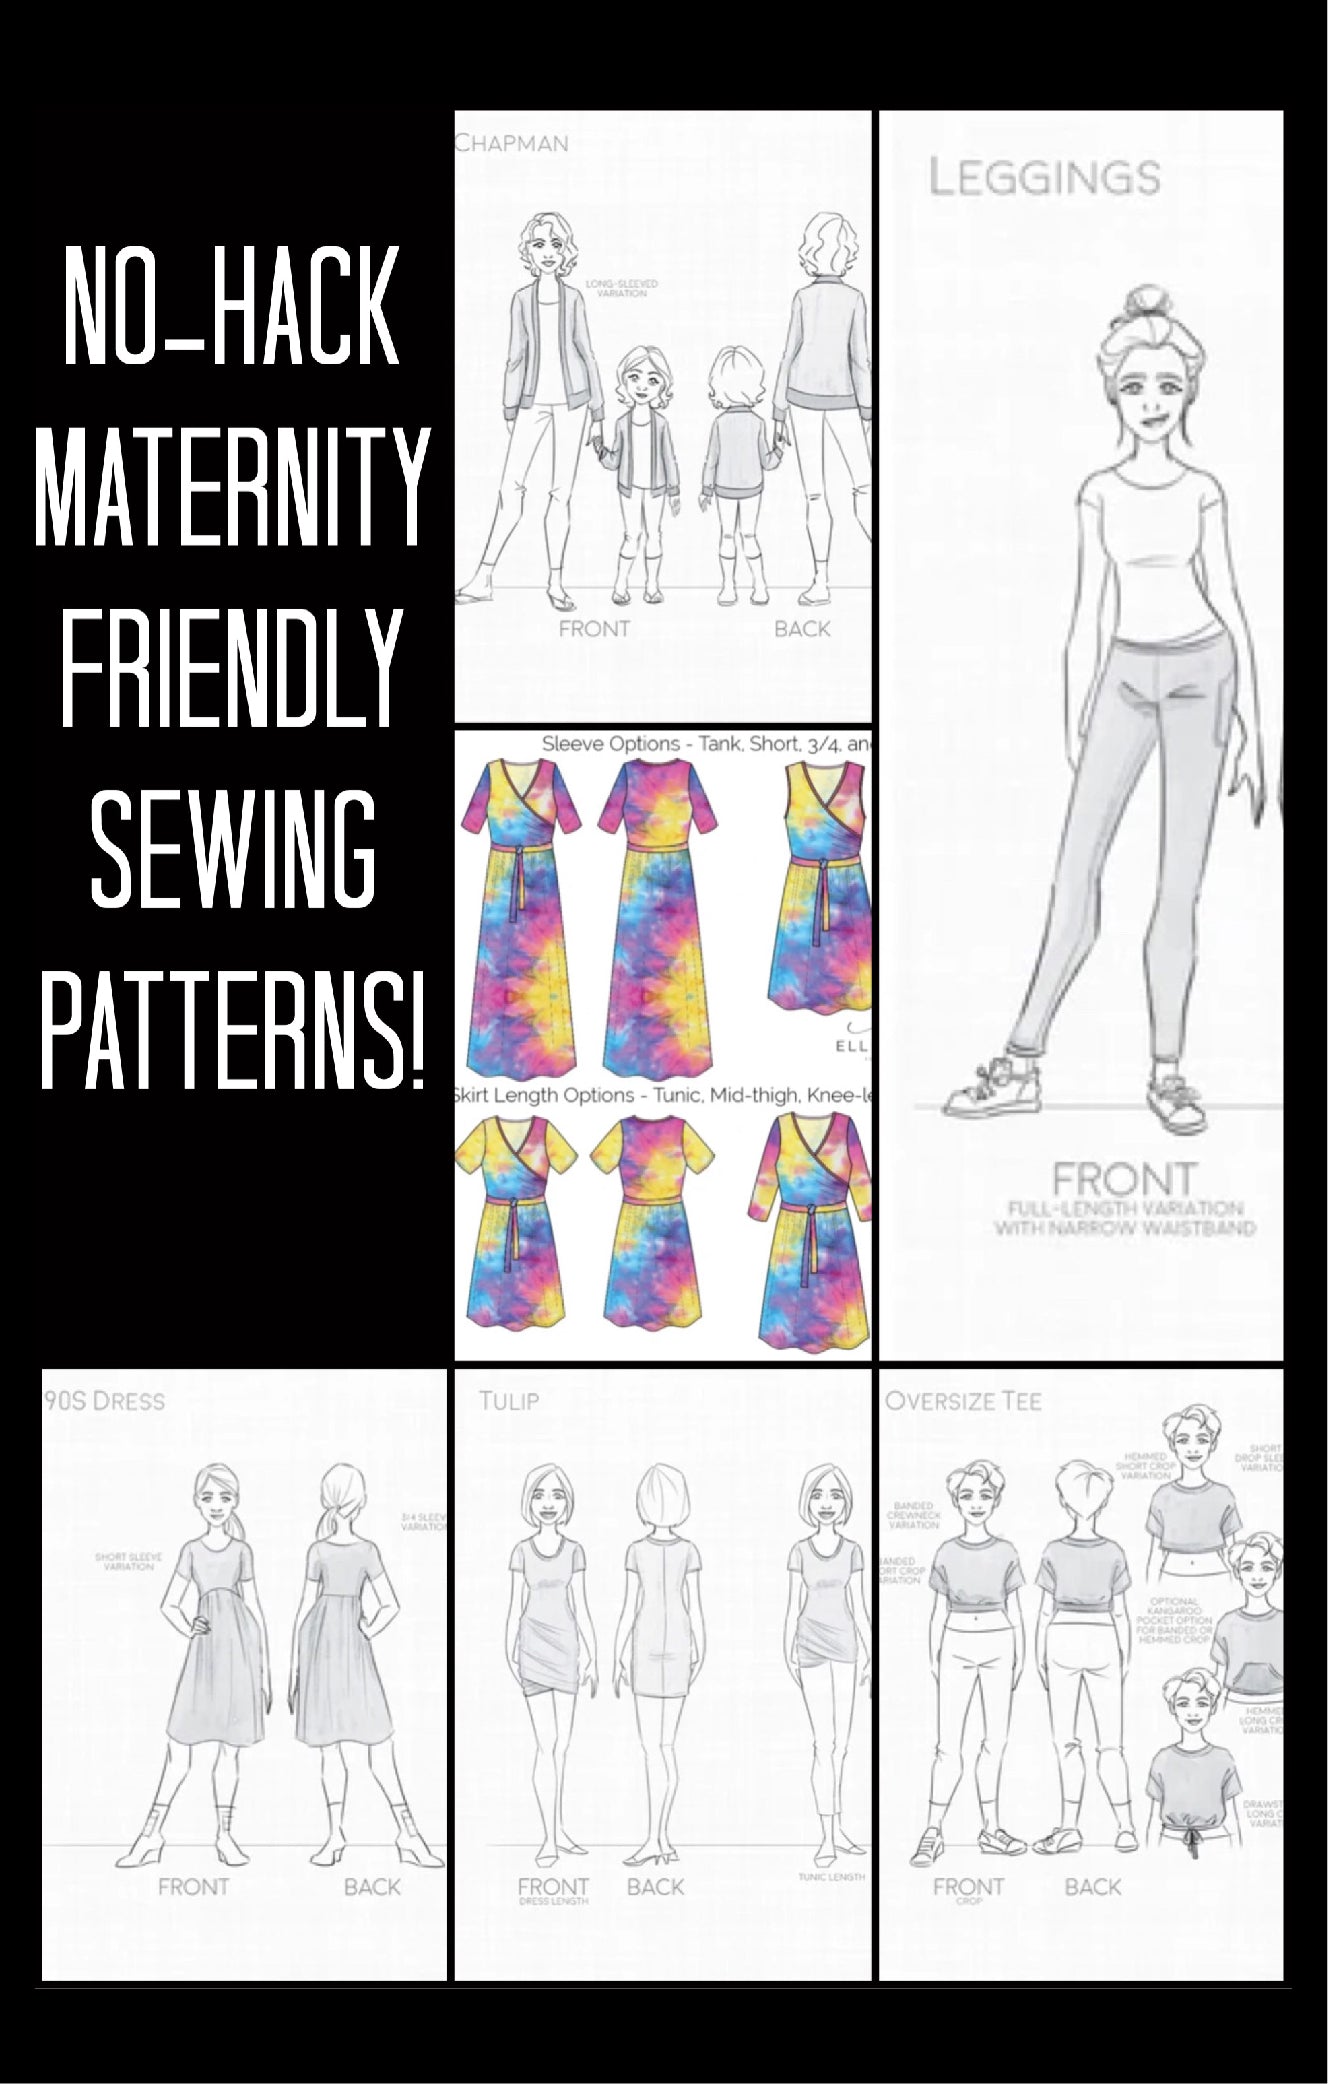 No Hack Maternity Friendly Sewing Patterns